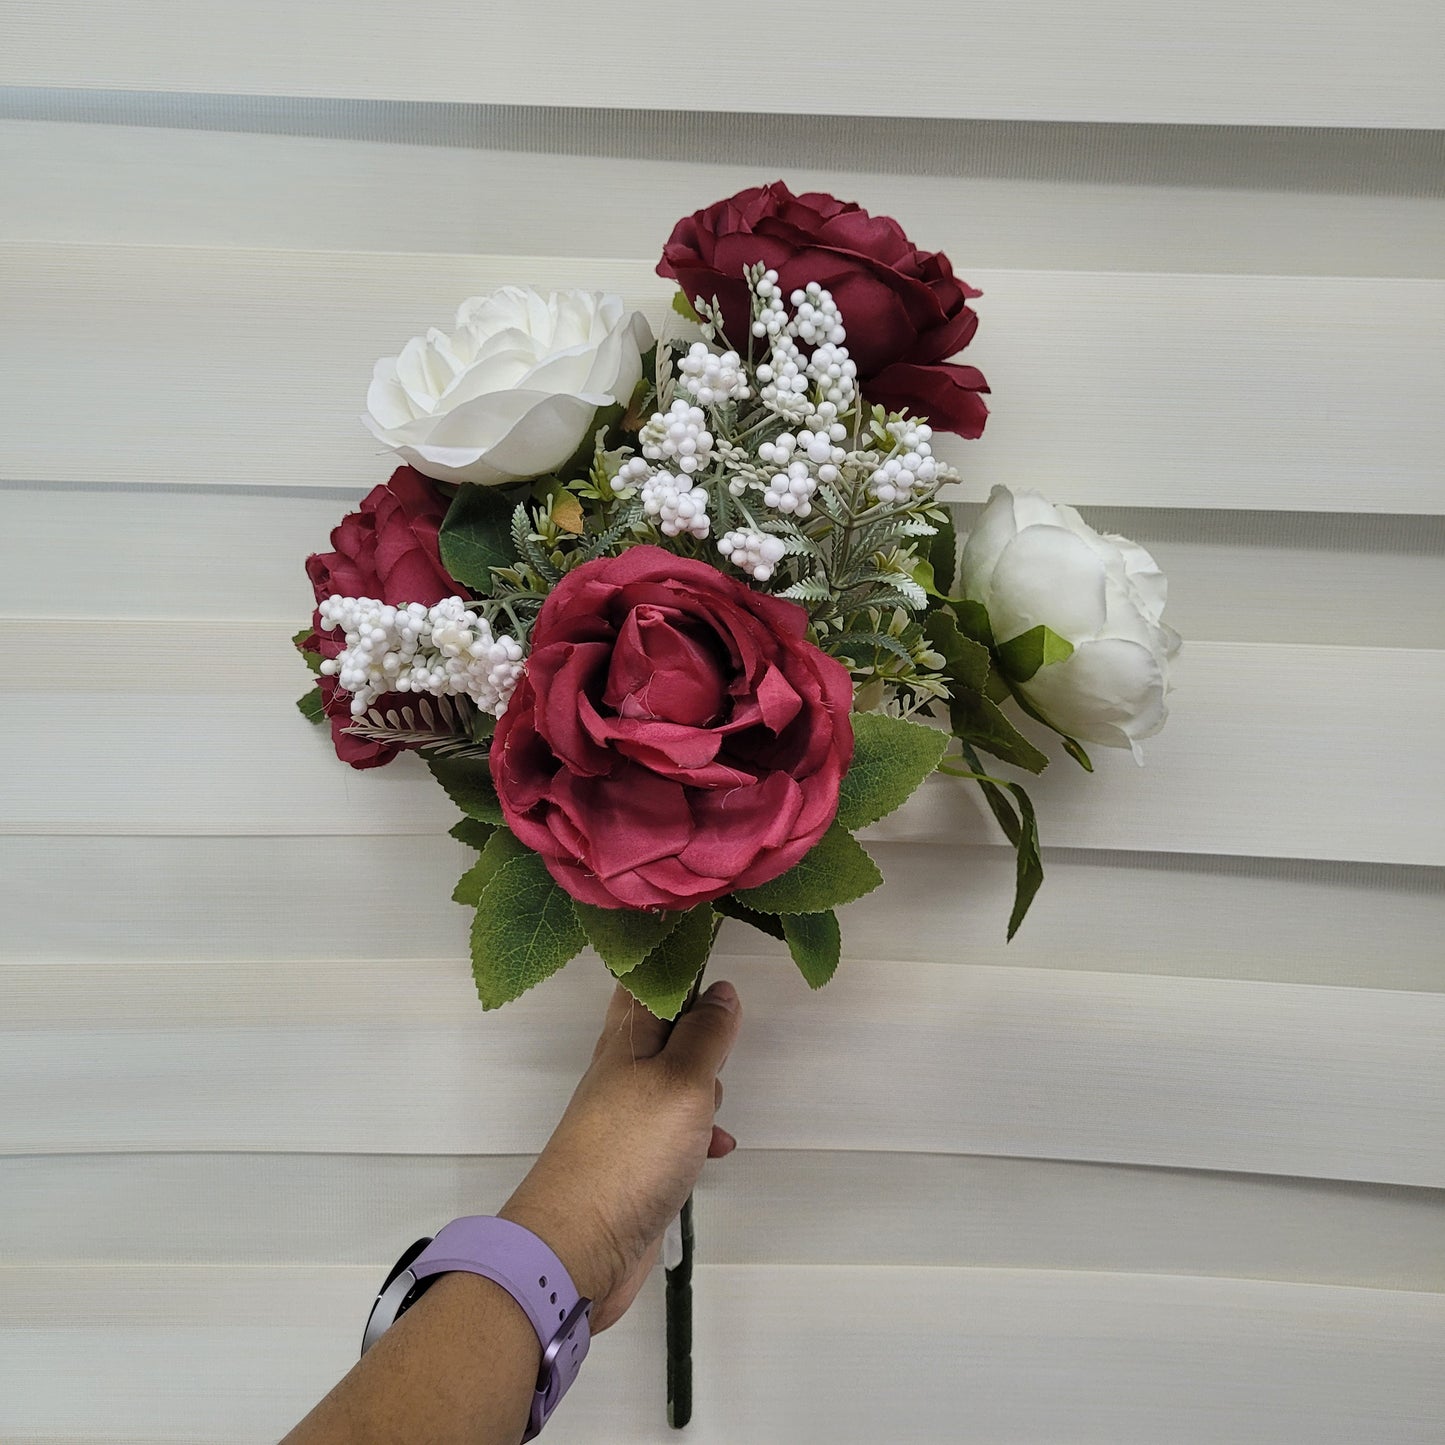 Rose Bunch - A377 (Maroon & White with Fillers)